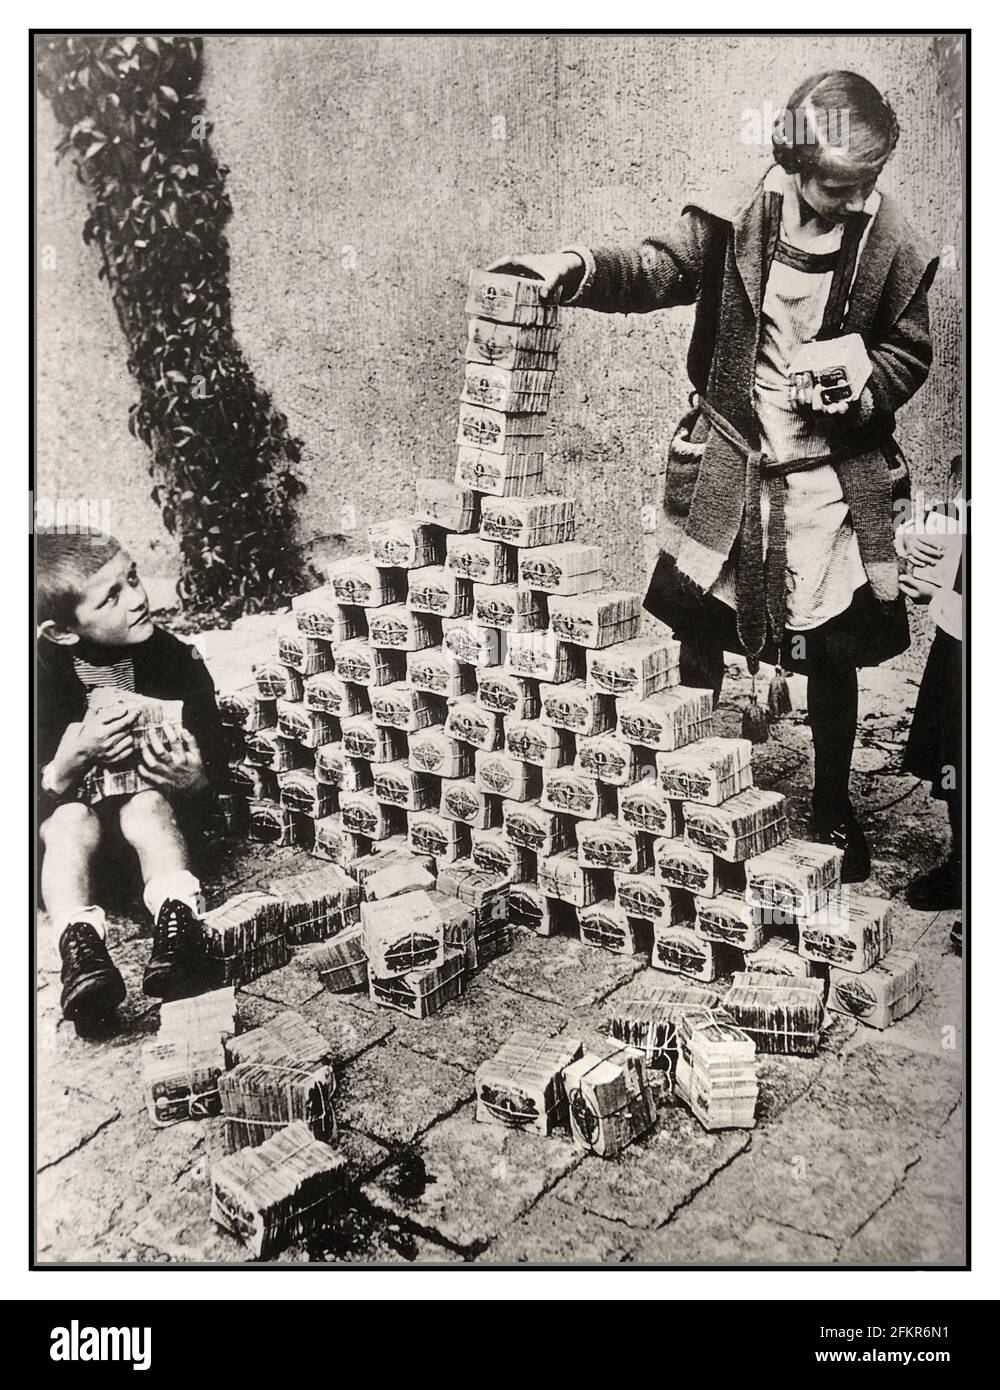 GERMANY INFLATION 1920’s Archive Hyperinflation Germany, children using banknotes as toys, Germany, 1920’s. Hyperinflation affected the German Papiermark, the currency of the Weimar Republic, between 1921 and 1923, primarily in 1923. It caused considerable internal political instability in the country, the occupation of the Ruhr by France and Belgium as well as misery for the general populace. Printing more money is exactly what Weimar Germany did in 1922. The hyperinflation led to the collapse of the economy. Stock Photo